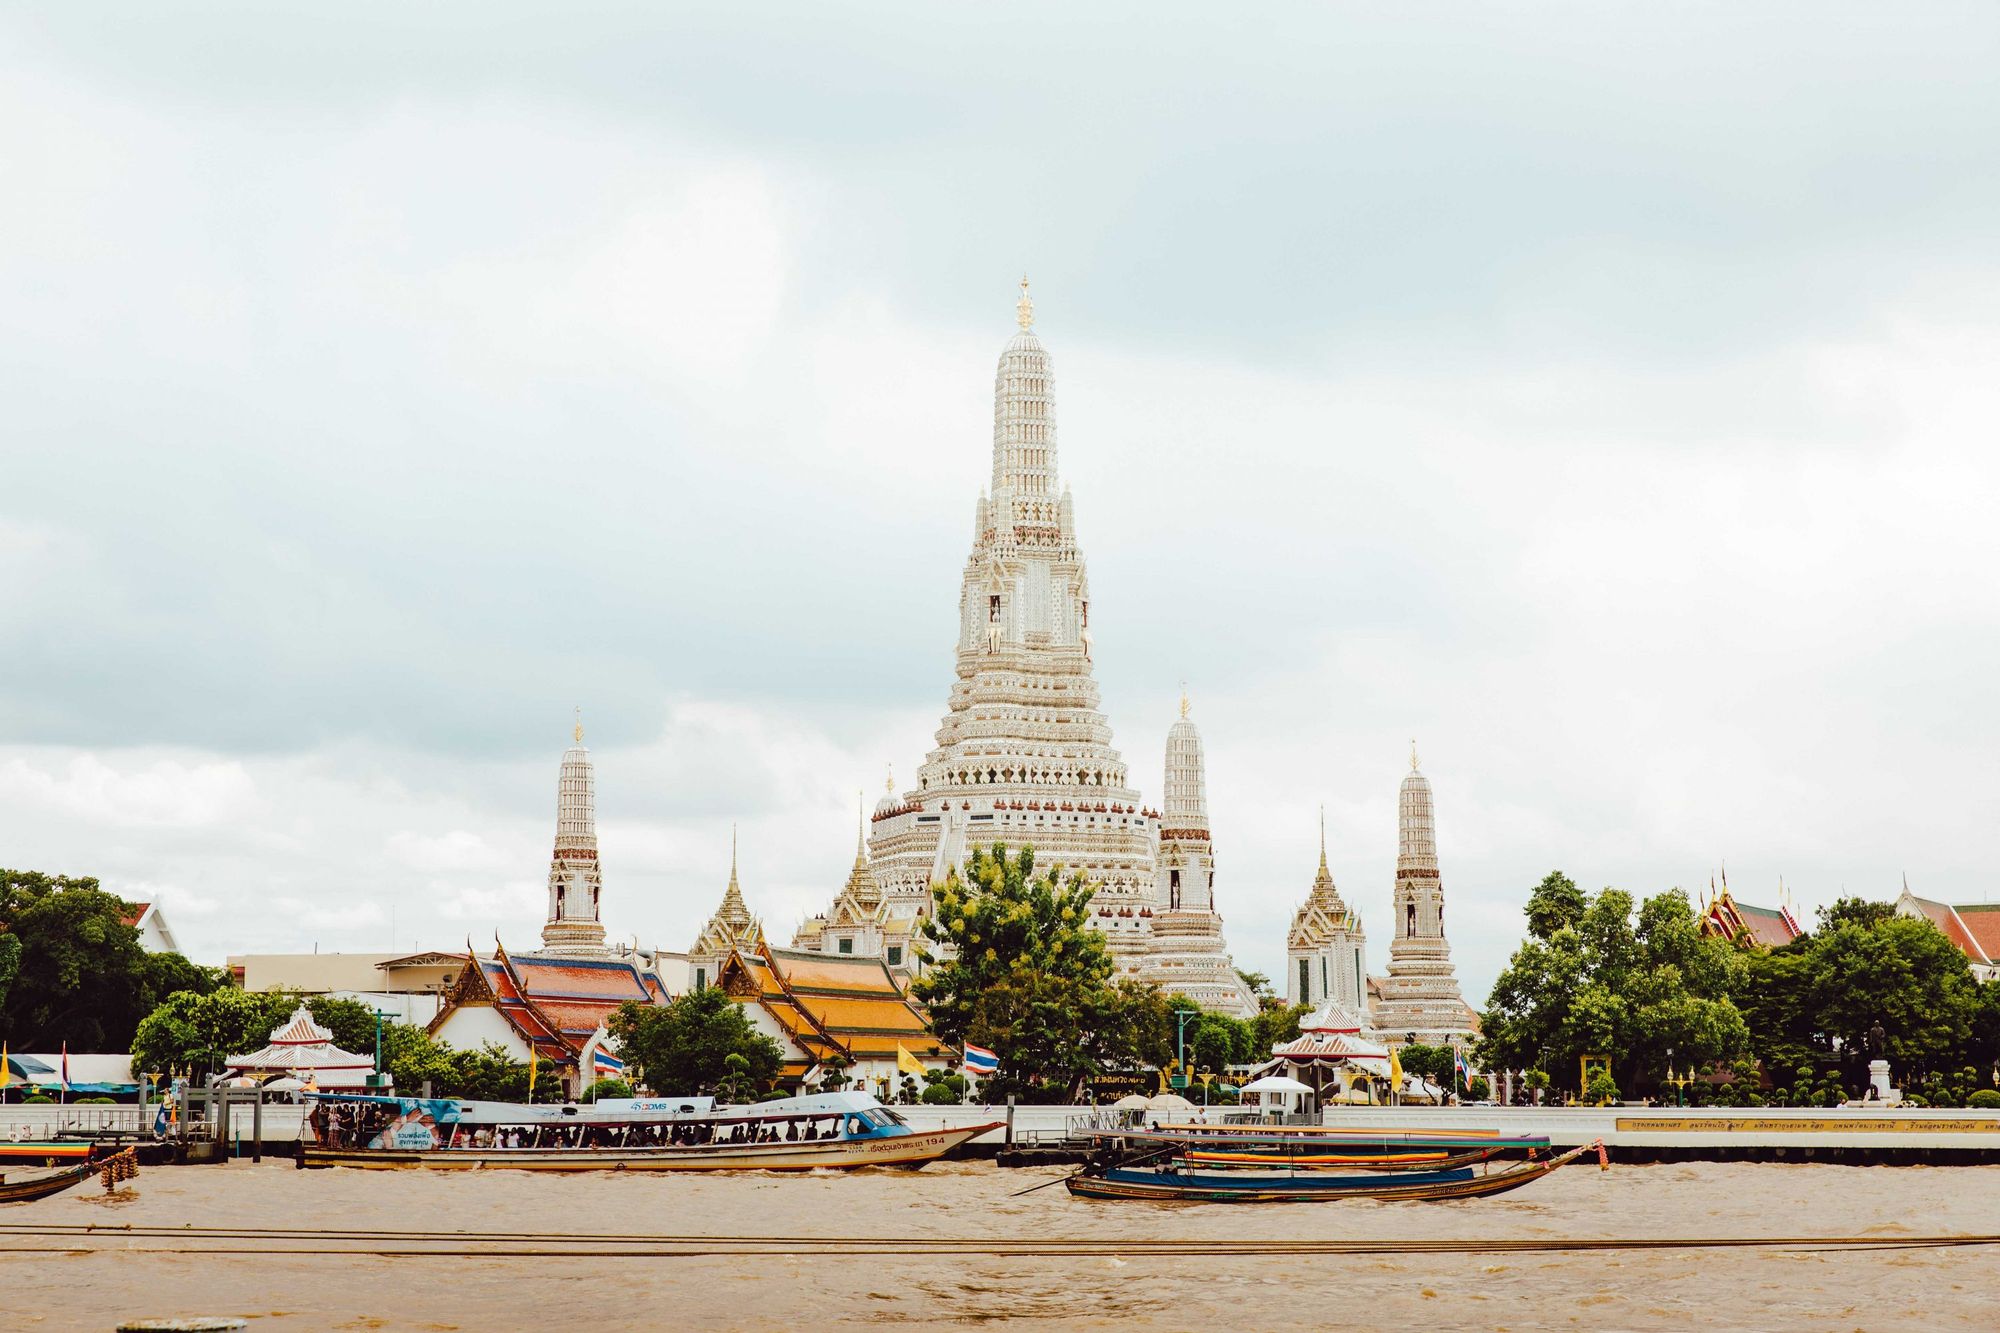 Detailed guide to visit Wat Arun and the most iconic temples in Bangkok